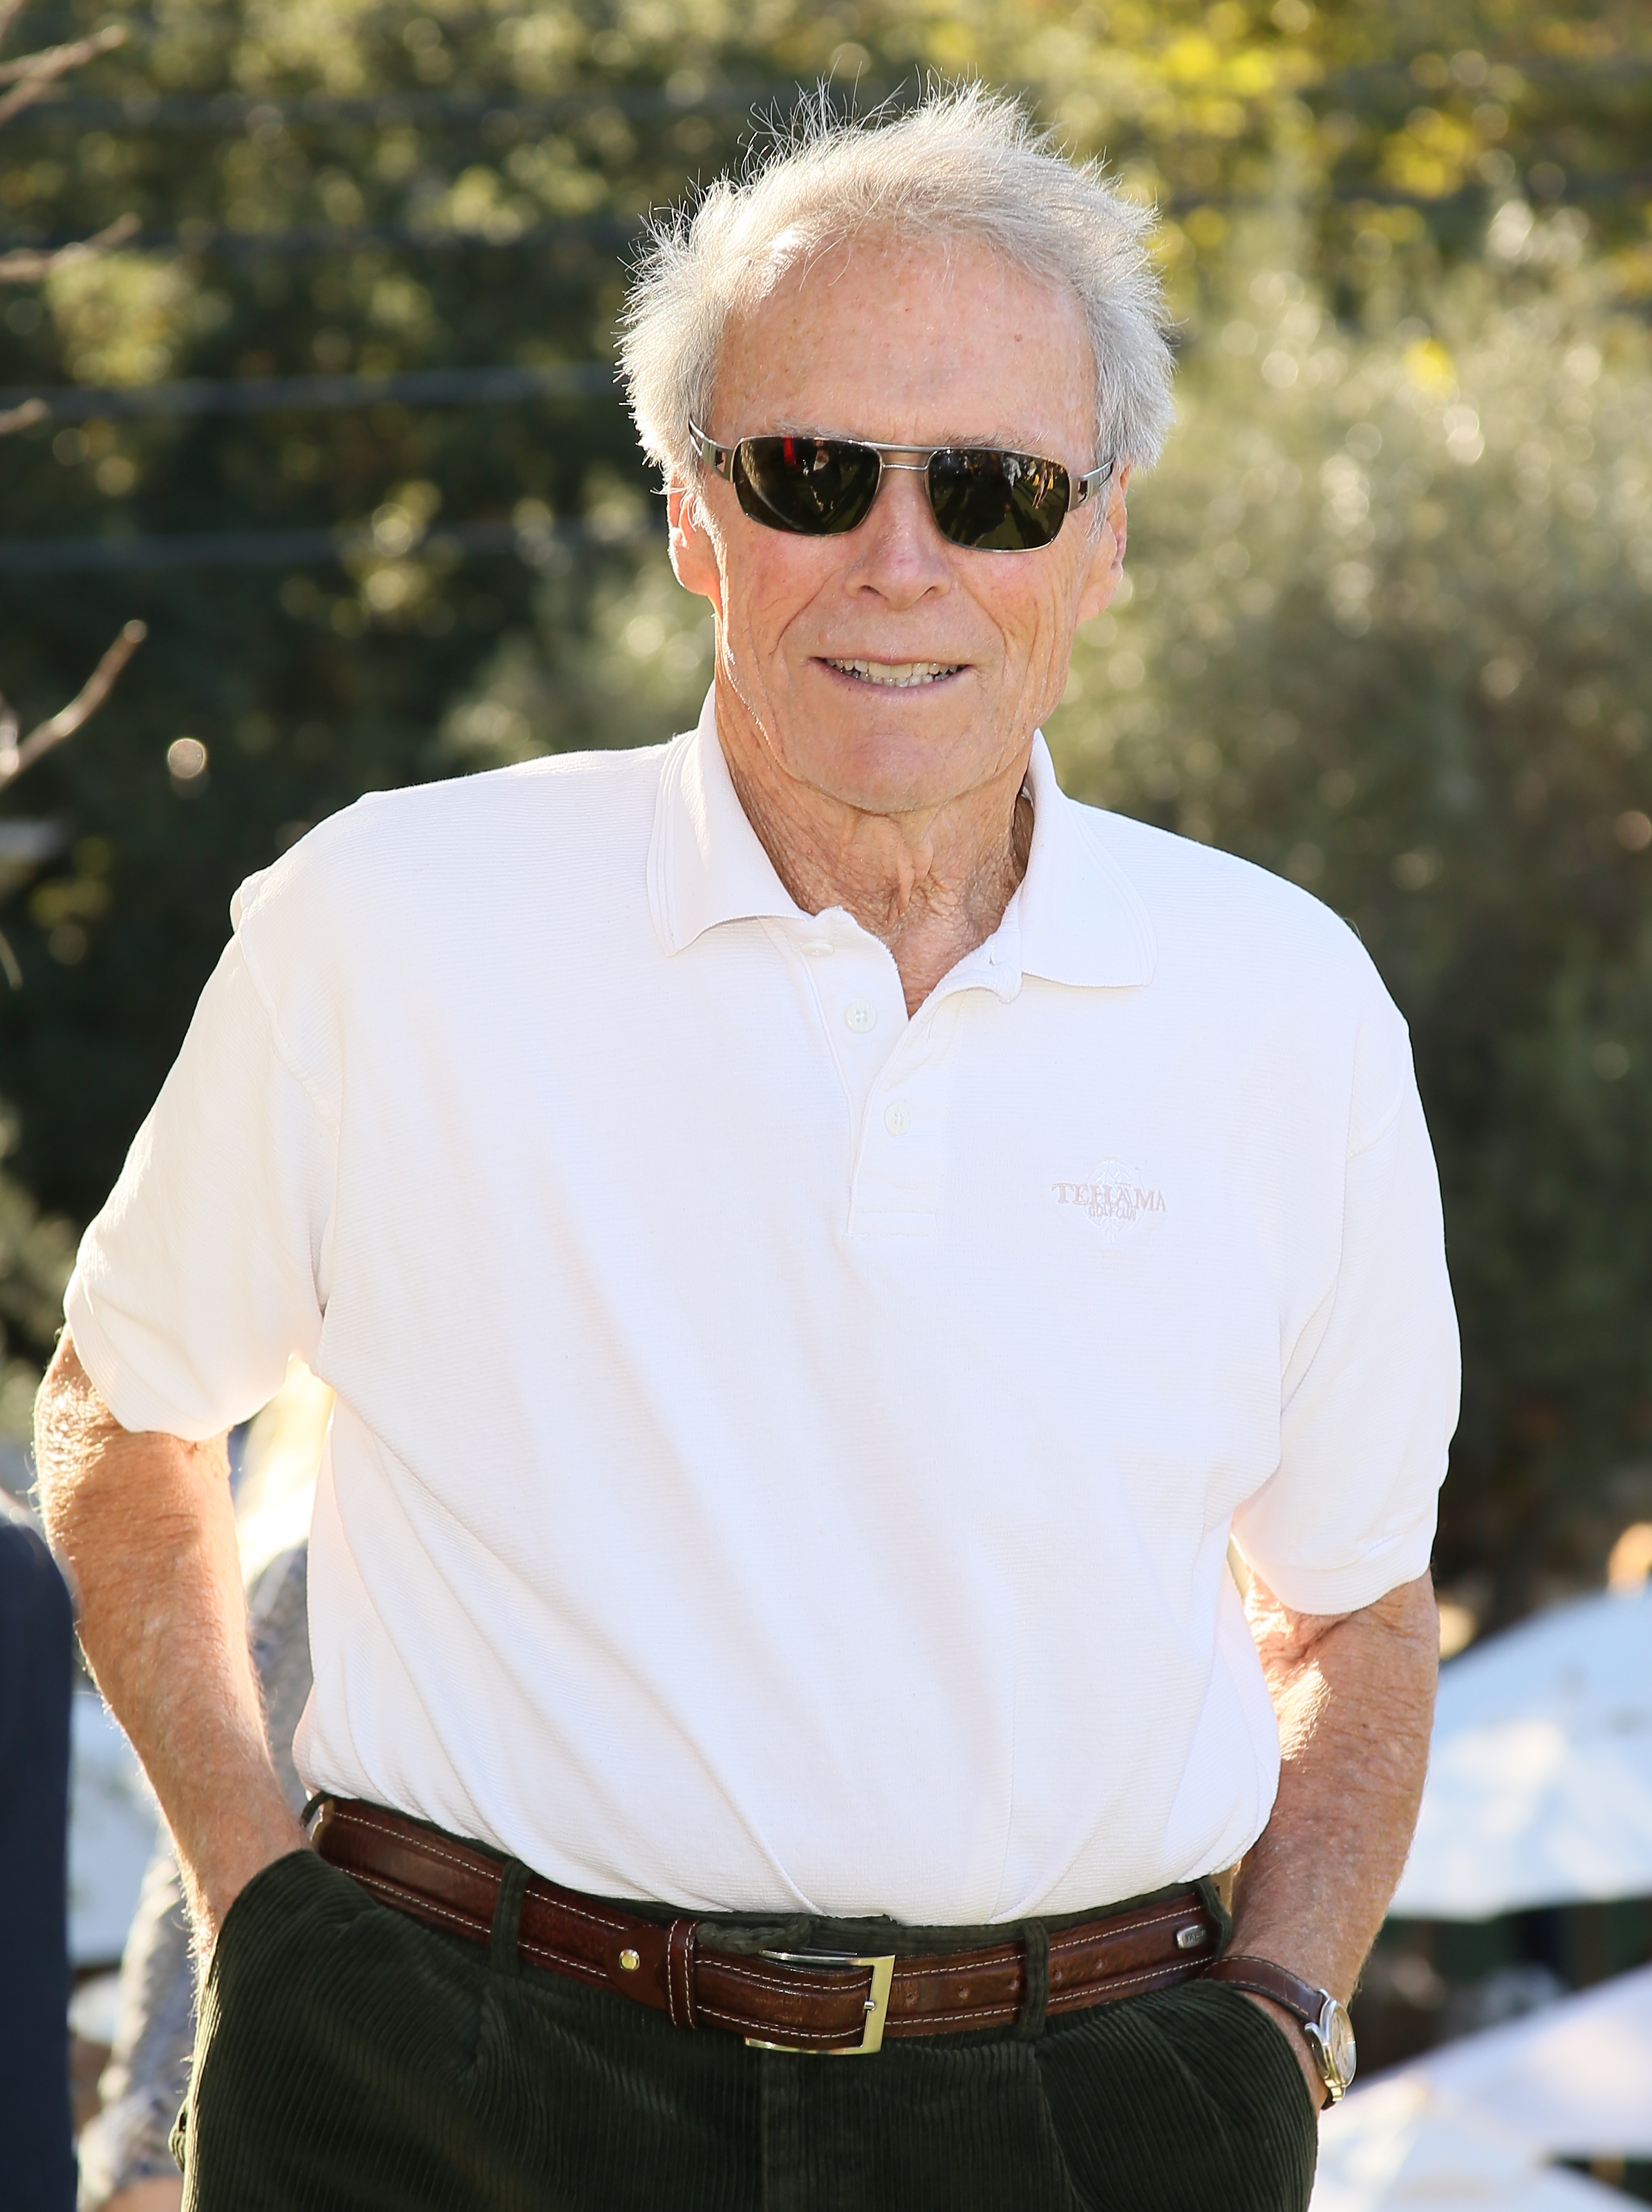 Clint Eastwood at the Eastwood Ranch Foundations hosts 1st annual Fall Garden Party Animal Rescue Fundraiser in Malibu, California on November 7, 2015 | Source: Getty Images